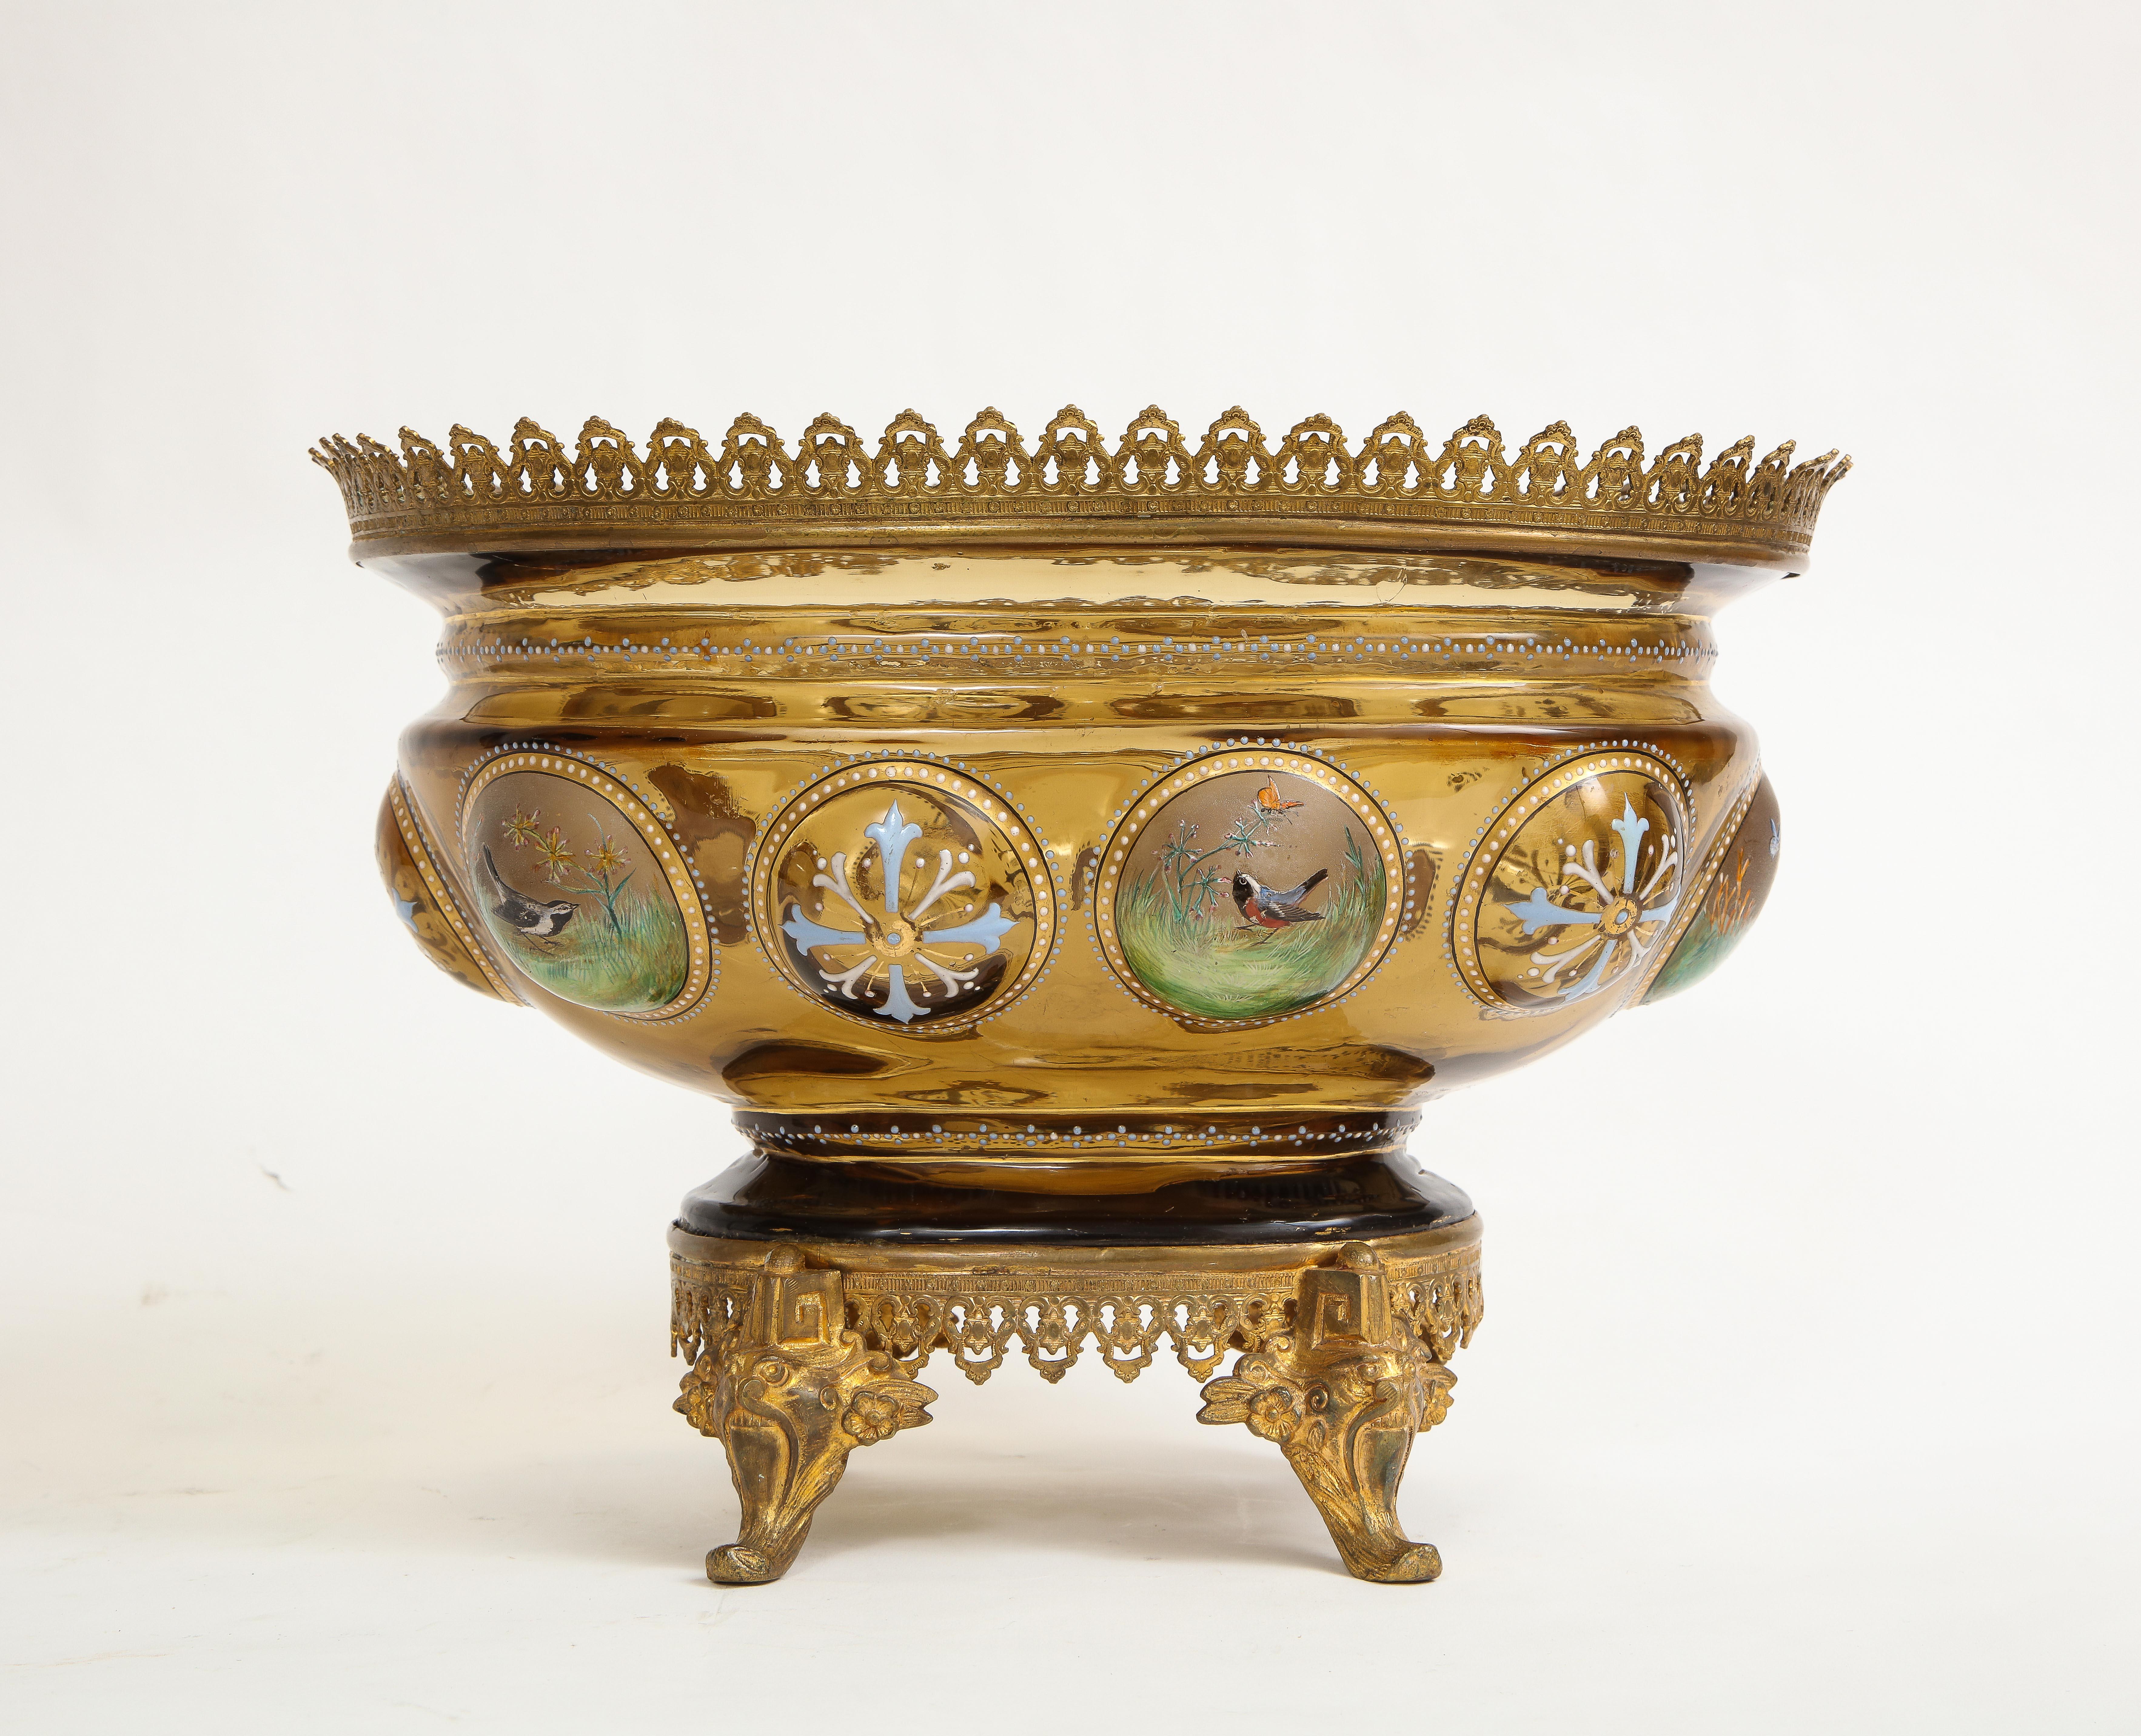 An Antique 19th century dore bronze mounted moser light-amber colored crystal and enamel centerpiece/bowl. The crystal is fabulously hand-blown and hand-carved with a multitude of hand-painted enamel decorations of birds, butterflies, flowers, and